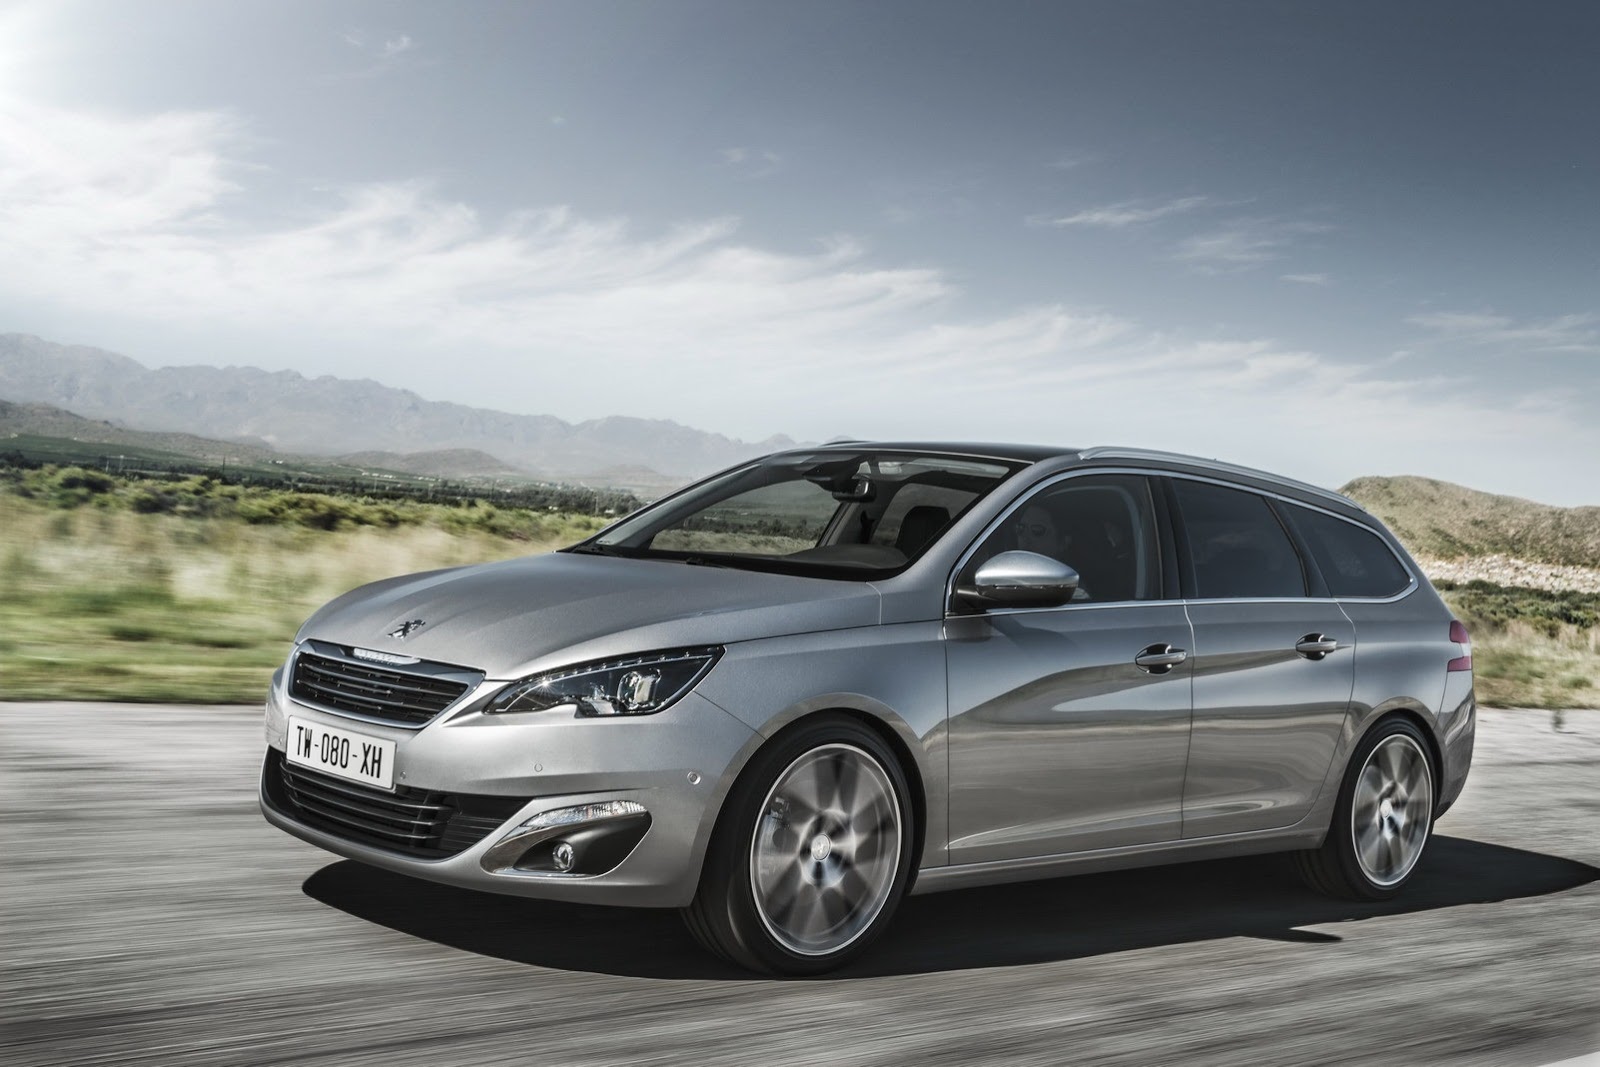 PEUGEOT 308 SW, SPORT AND FAMILY - Auto&Design